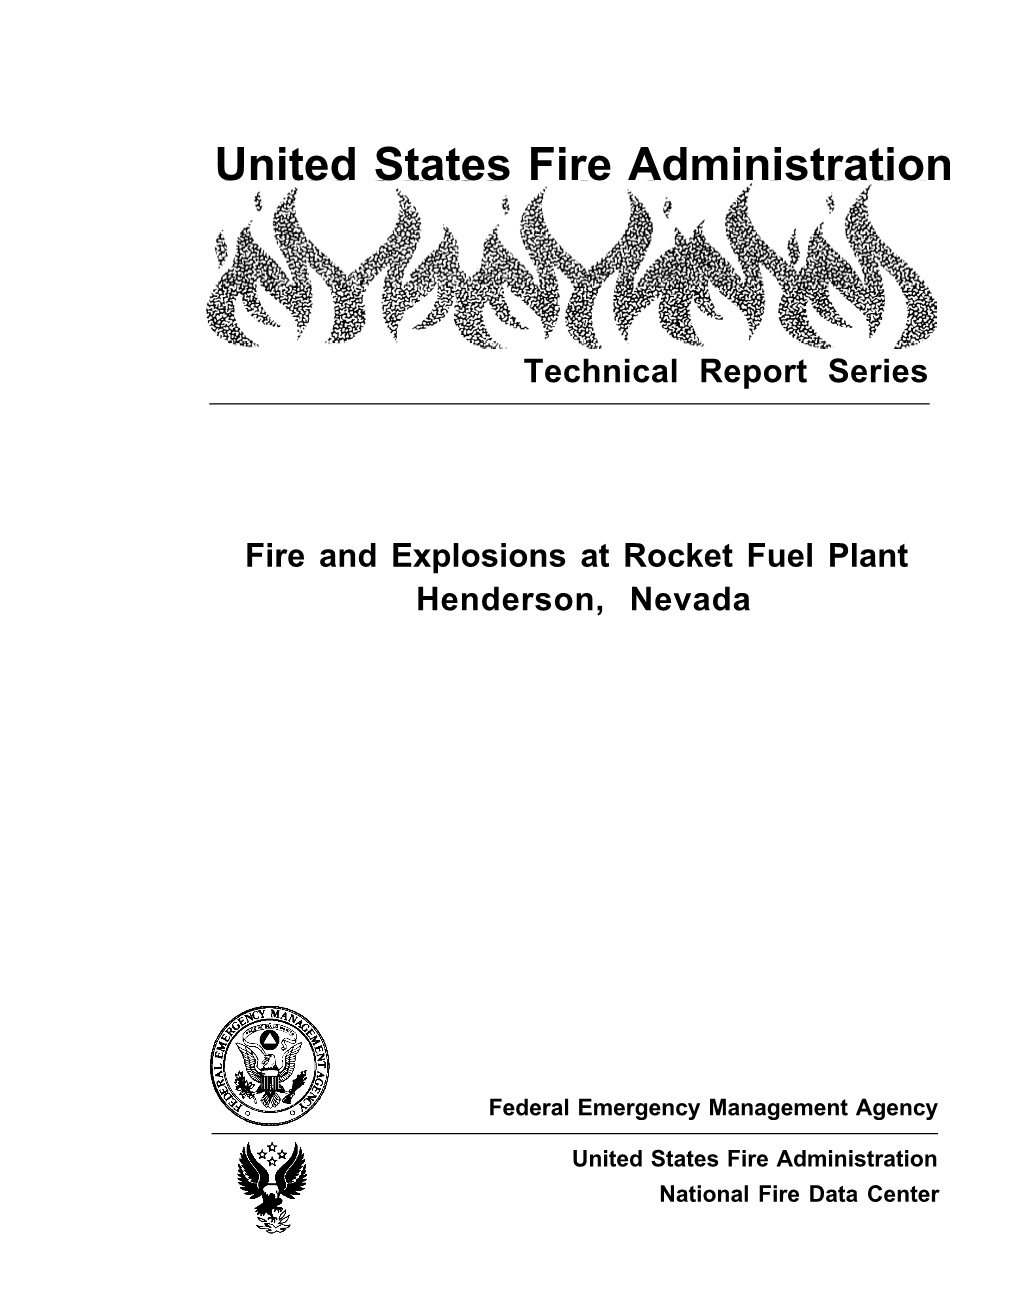 Fire and Explosions at Rocket Fuel Plant Henderson, Nevada (May 4, 1988)